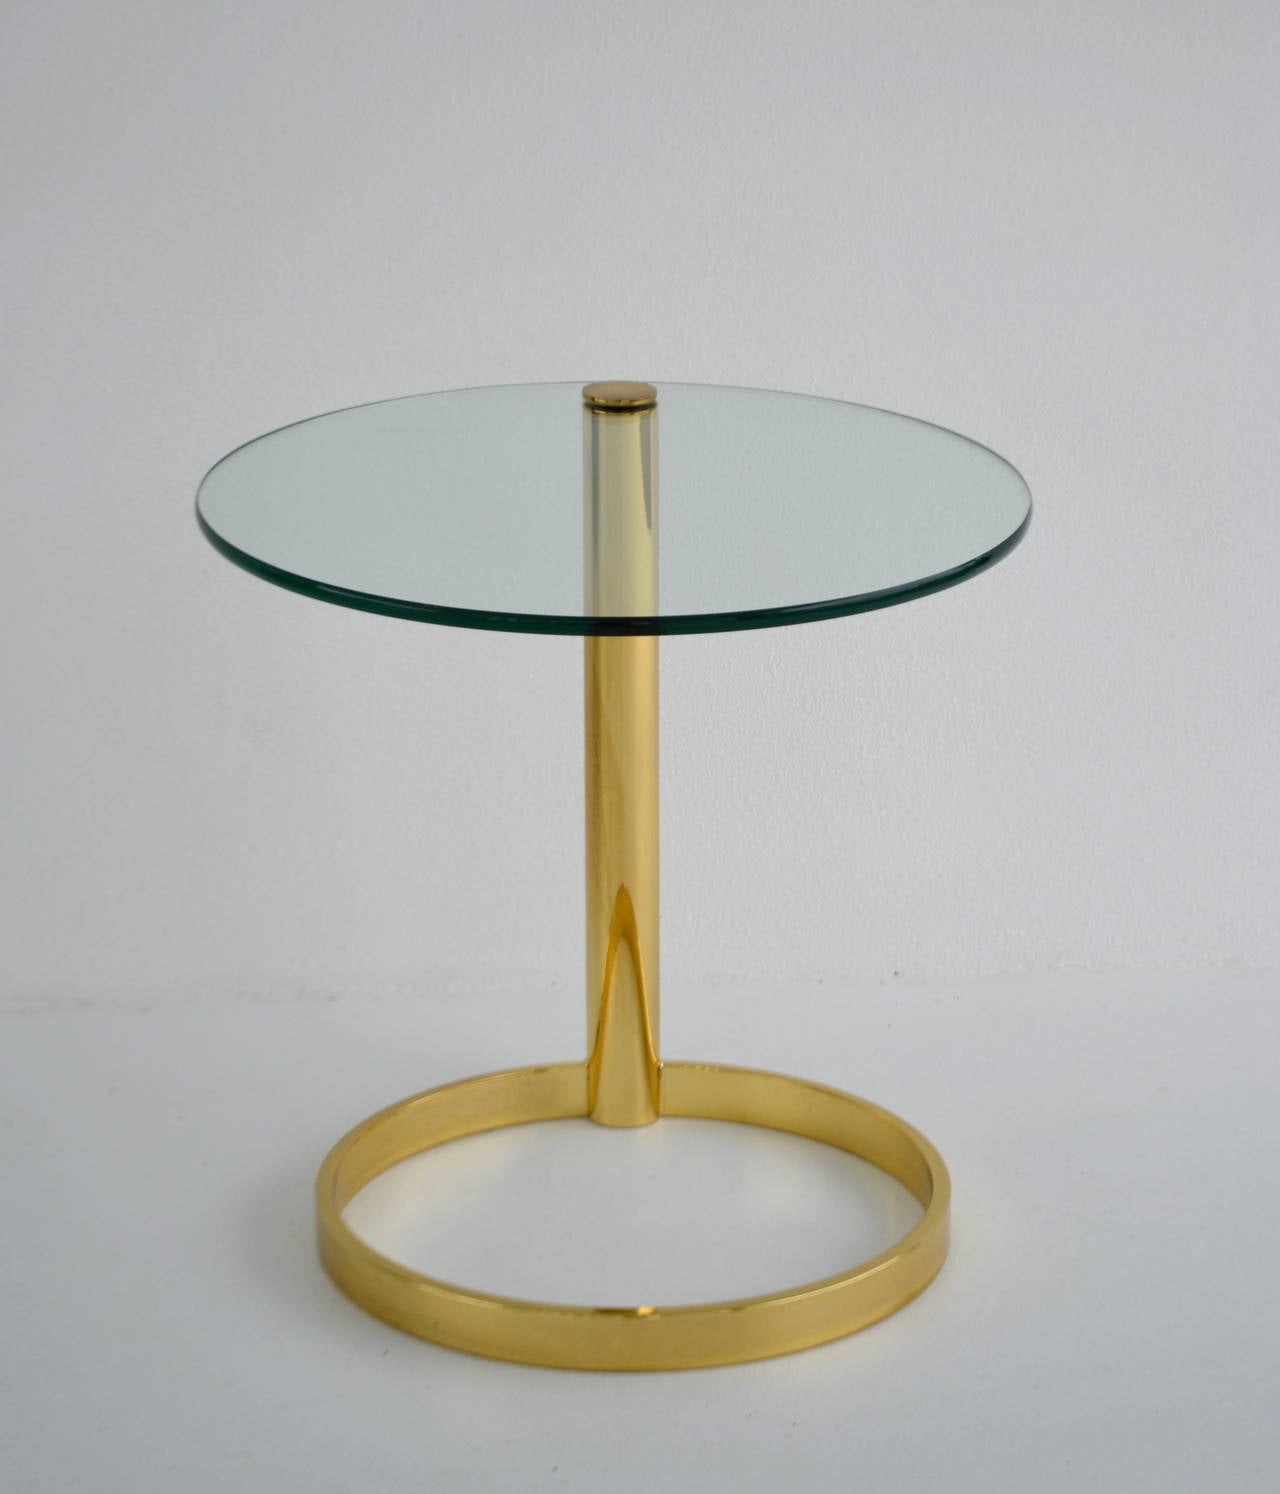 Stunning Post-Modern polished brass round side table with glass top, circa 1970s-1980s by Pace. This sculptural architectural occasional table is designed with a brass column support and cantilevered swivel glass top.